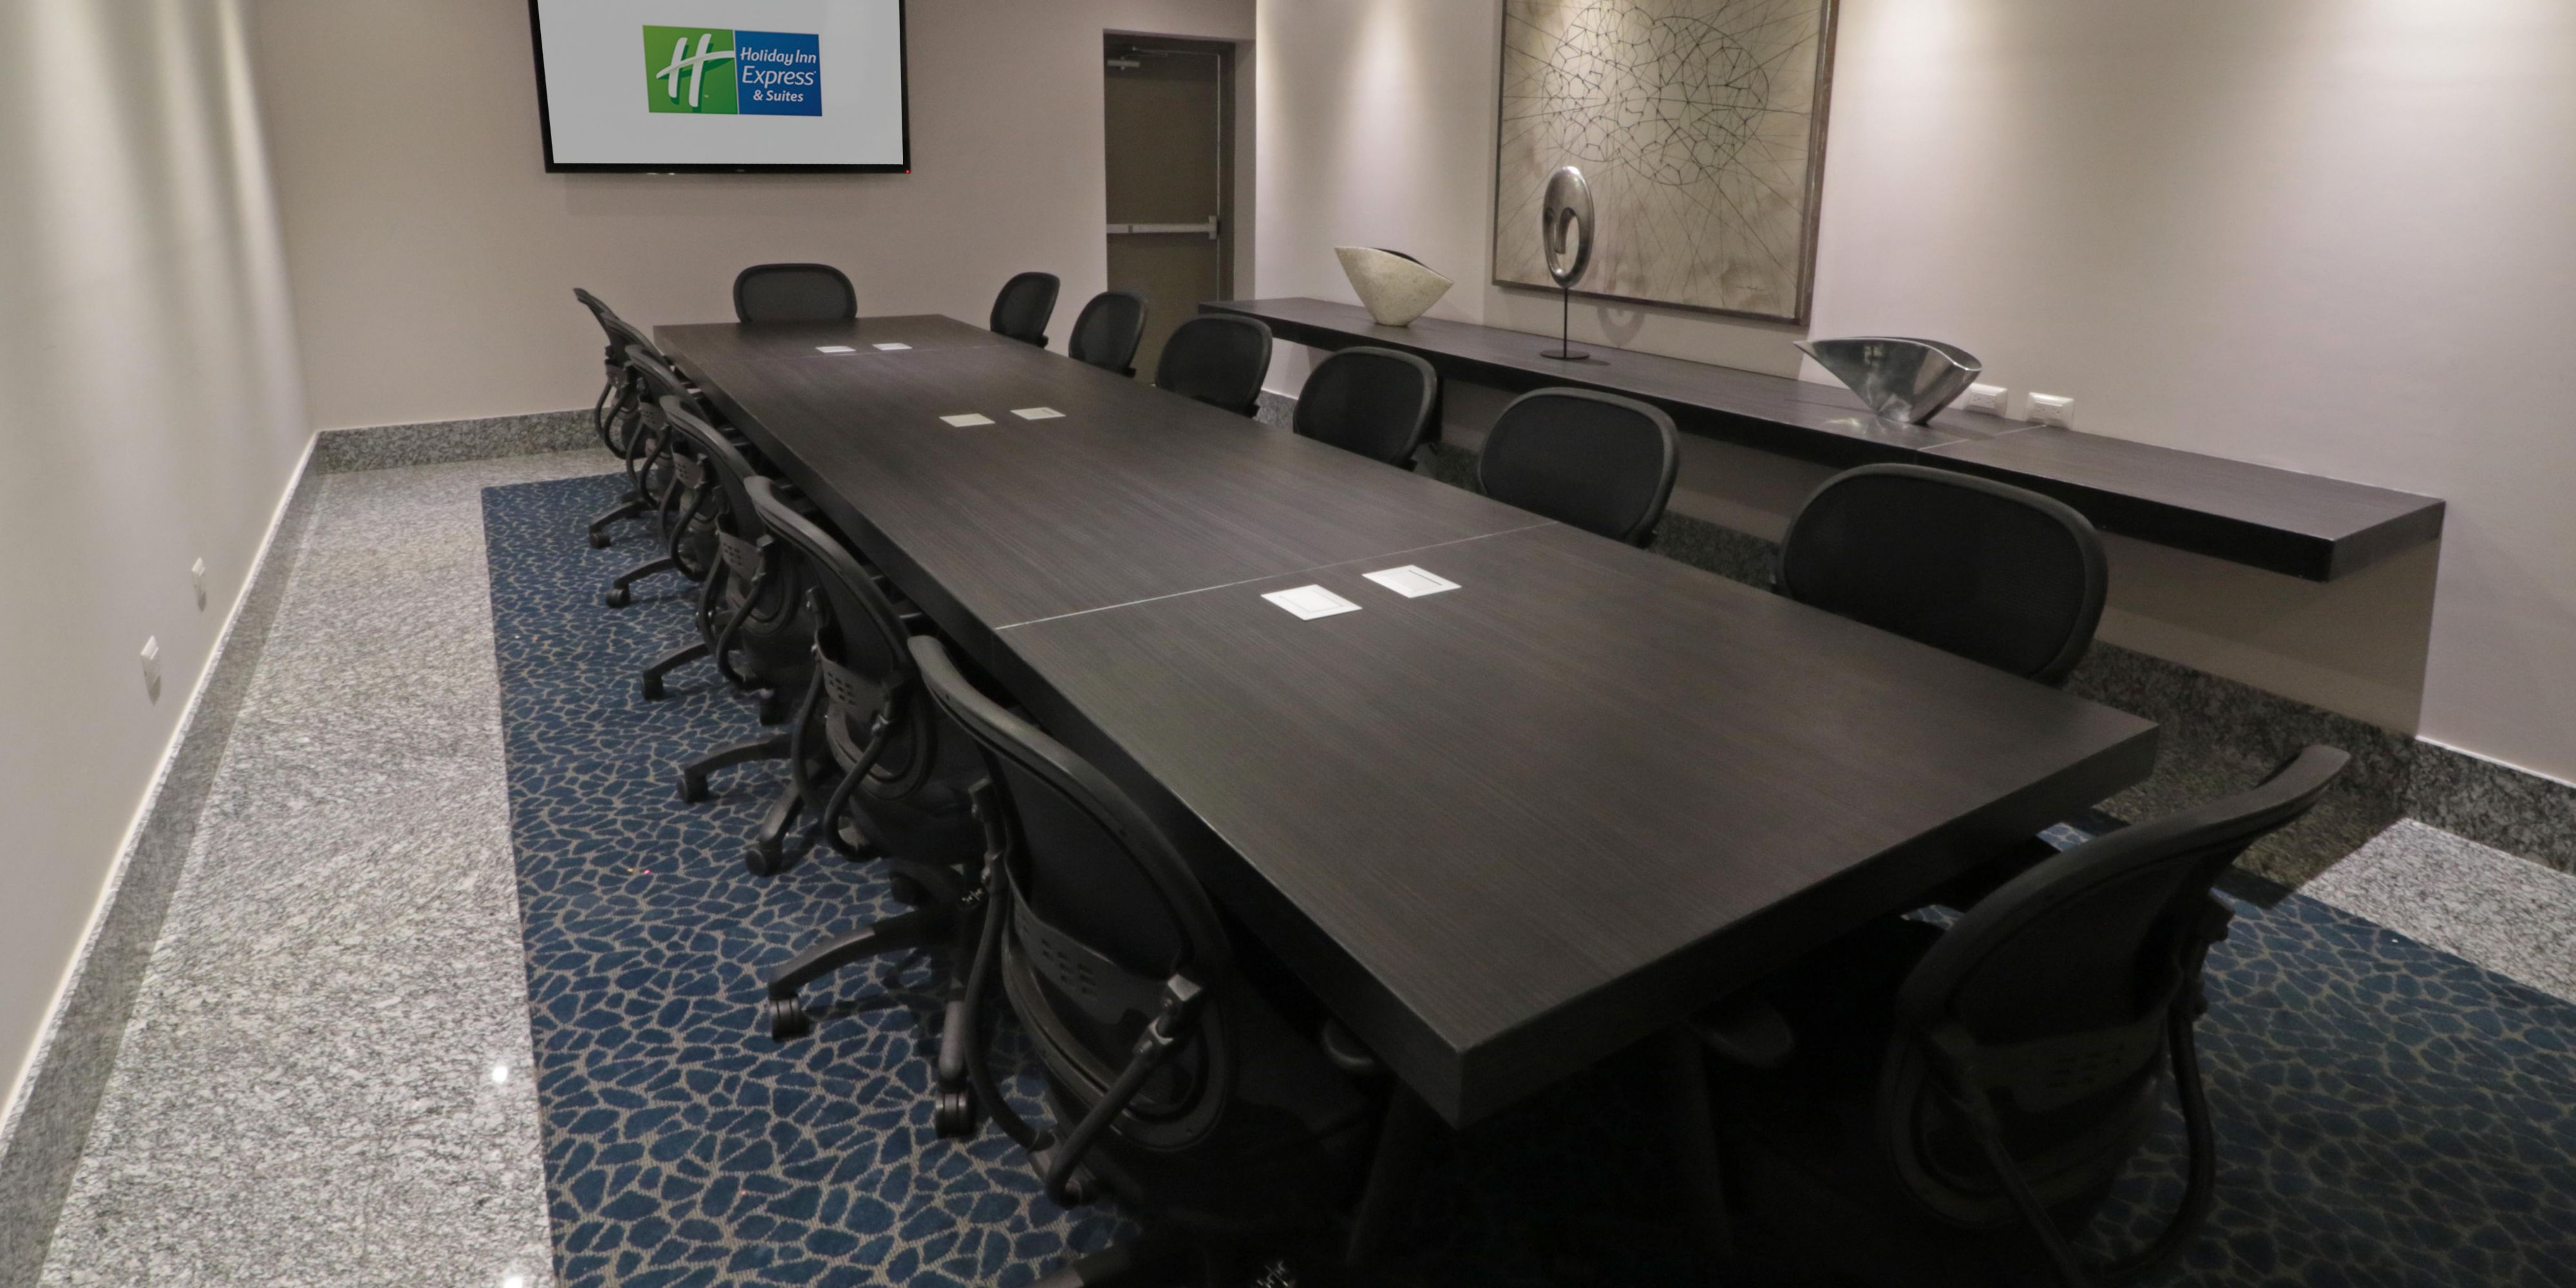 At Holiday Inn Express & Suites you can use our executive spaces for complimentary meetings.